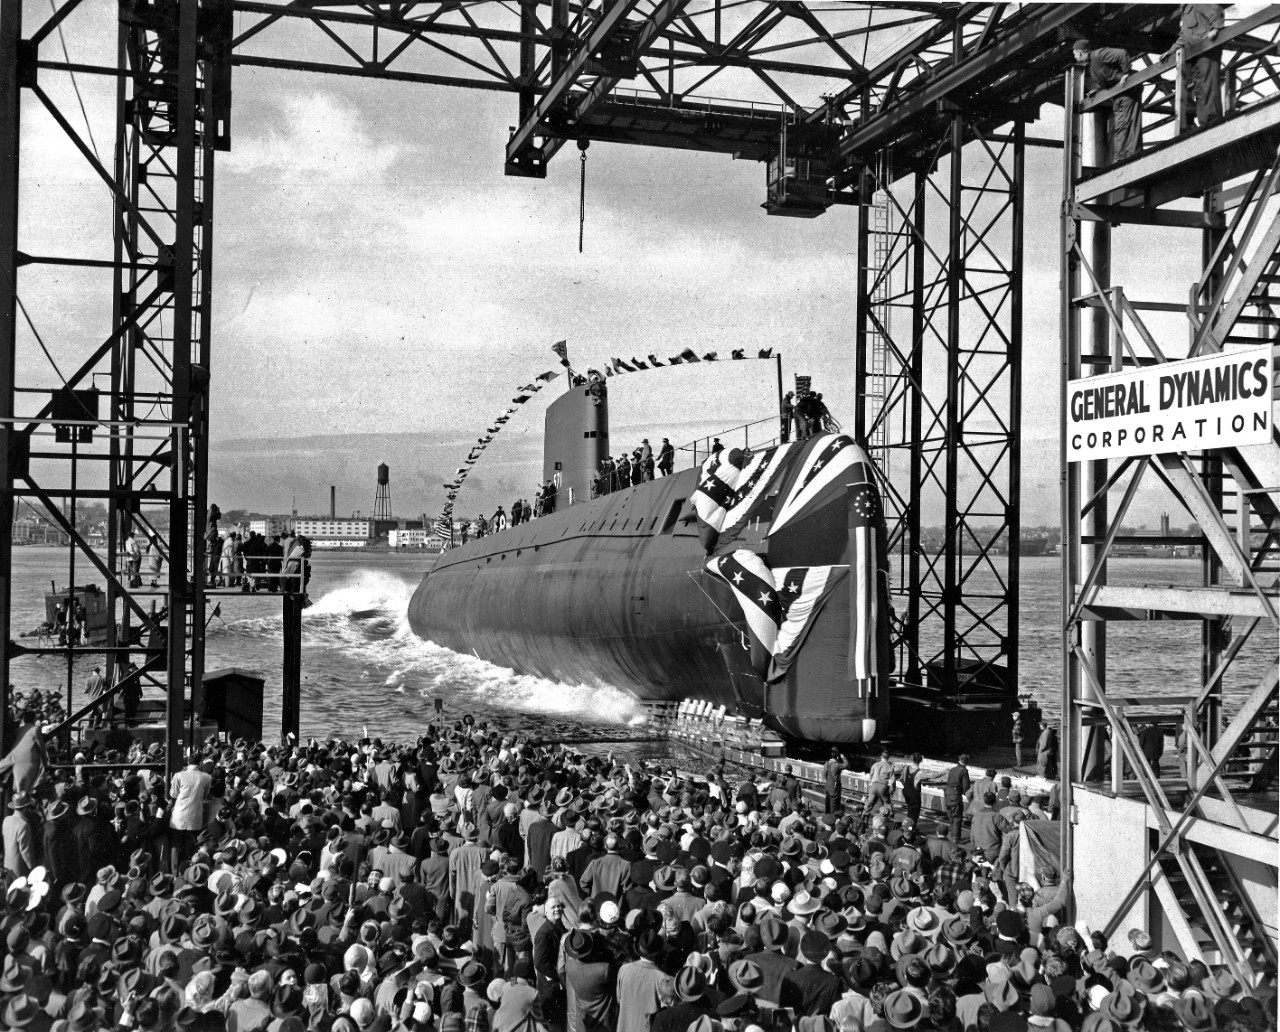 <p>Launching of USS Nautilus (SSN-571) at the Electric Boat Company, Groton, CT. January 21, 1954. Image is from the USS Nautilus Photo Collection, UA 475.05</p>